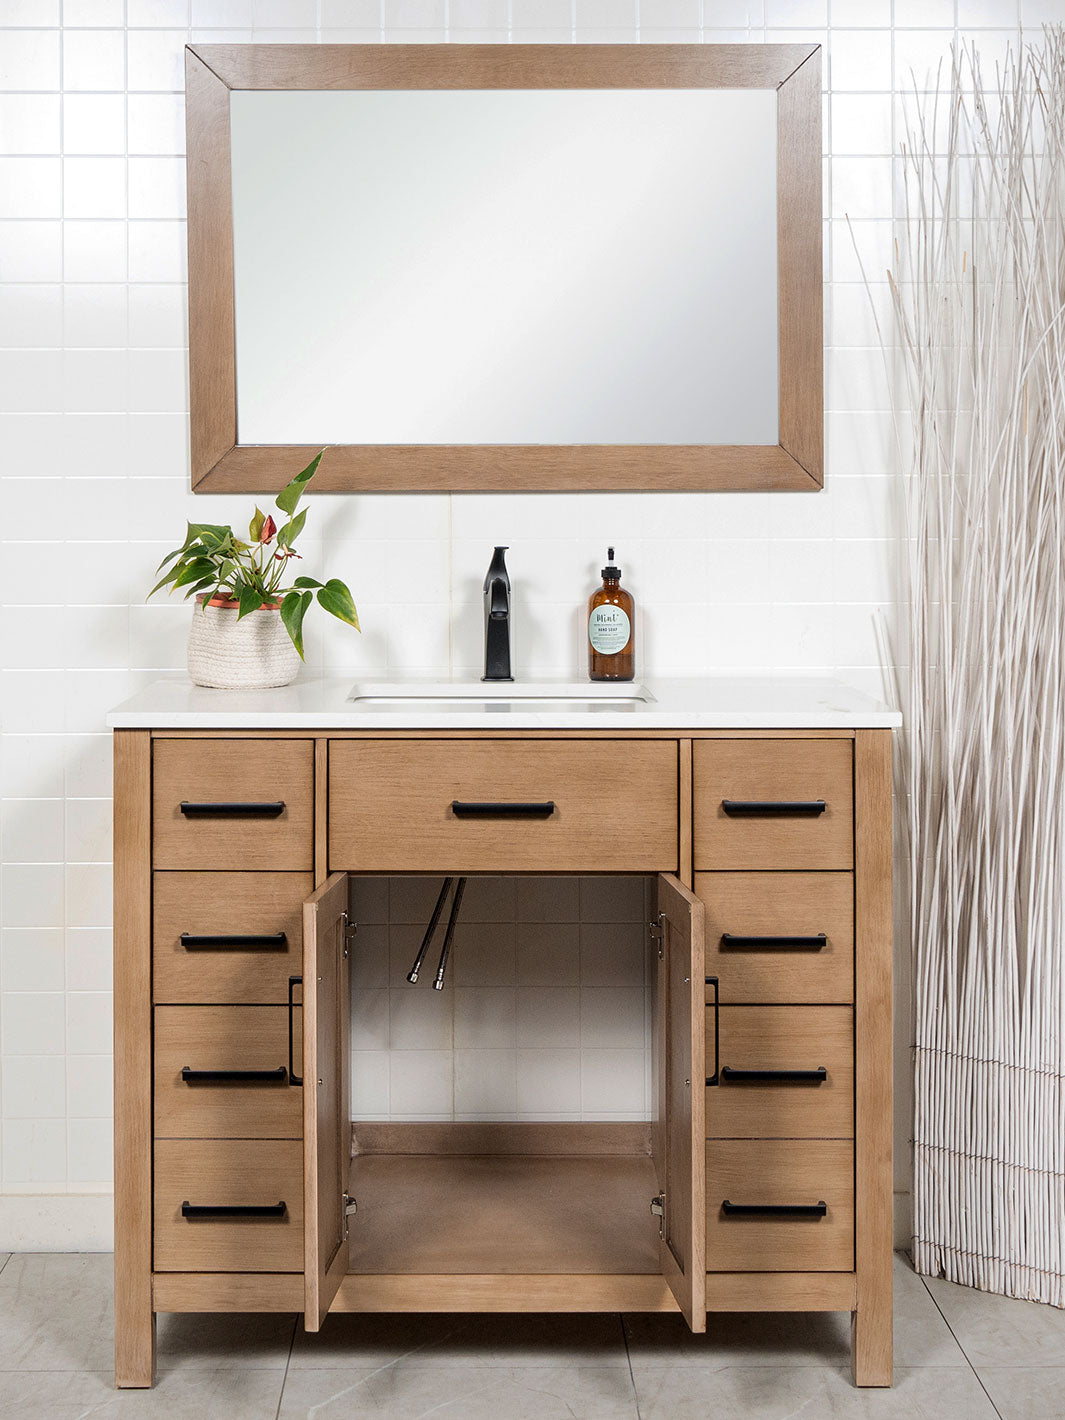 cupboard open on vanity to show space beneath the sink